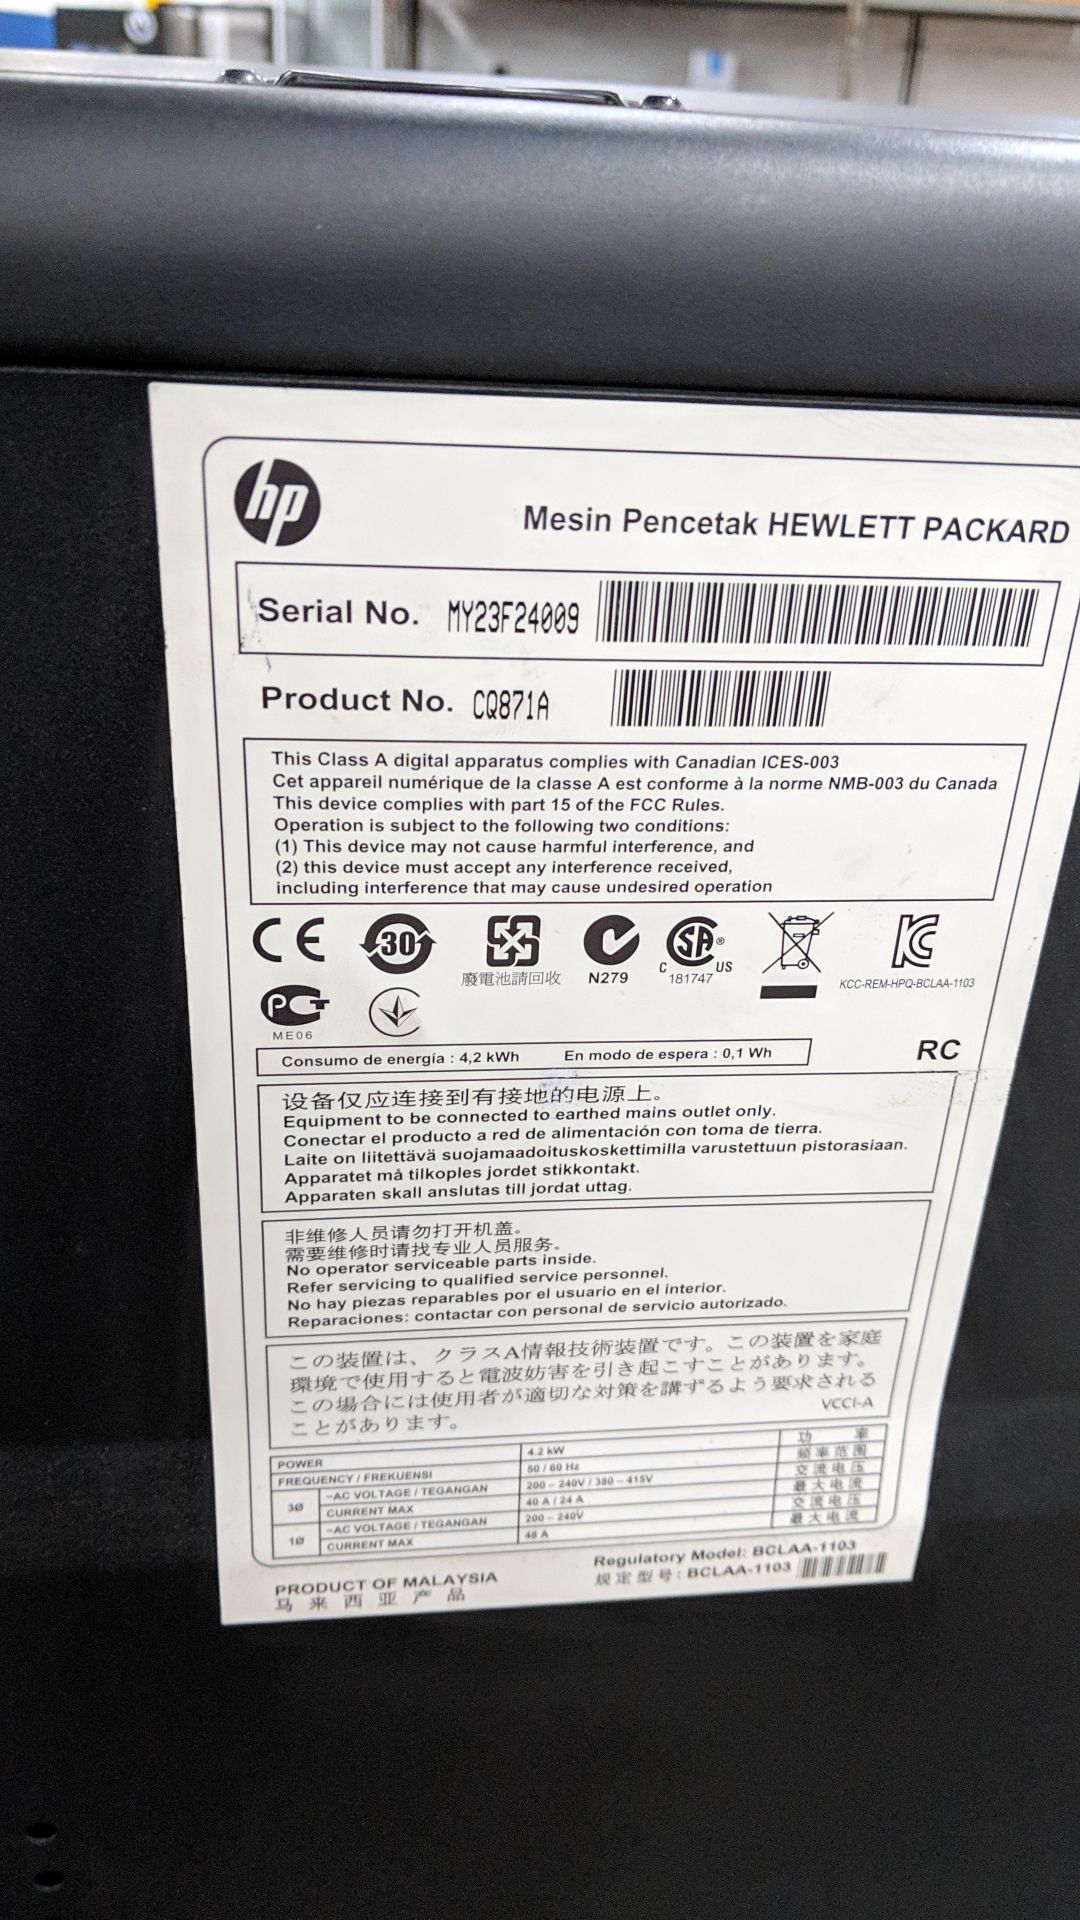 HP DesignJet L28500 latex 103.9" wide format printer, serial no. MY23F24009, product no. CQ871A - Image 3 of 12